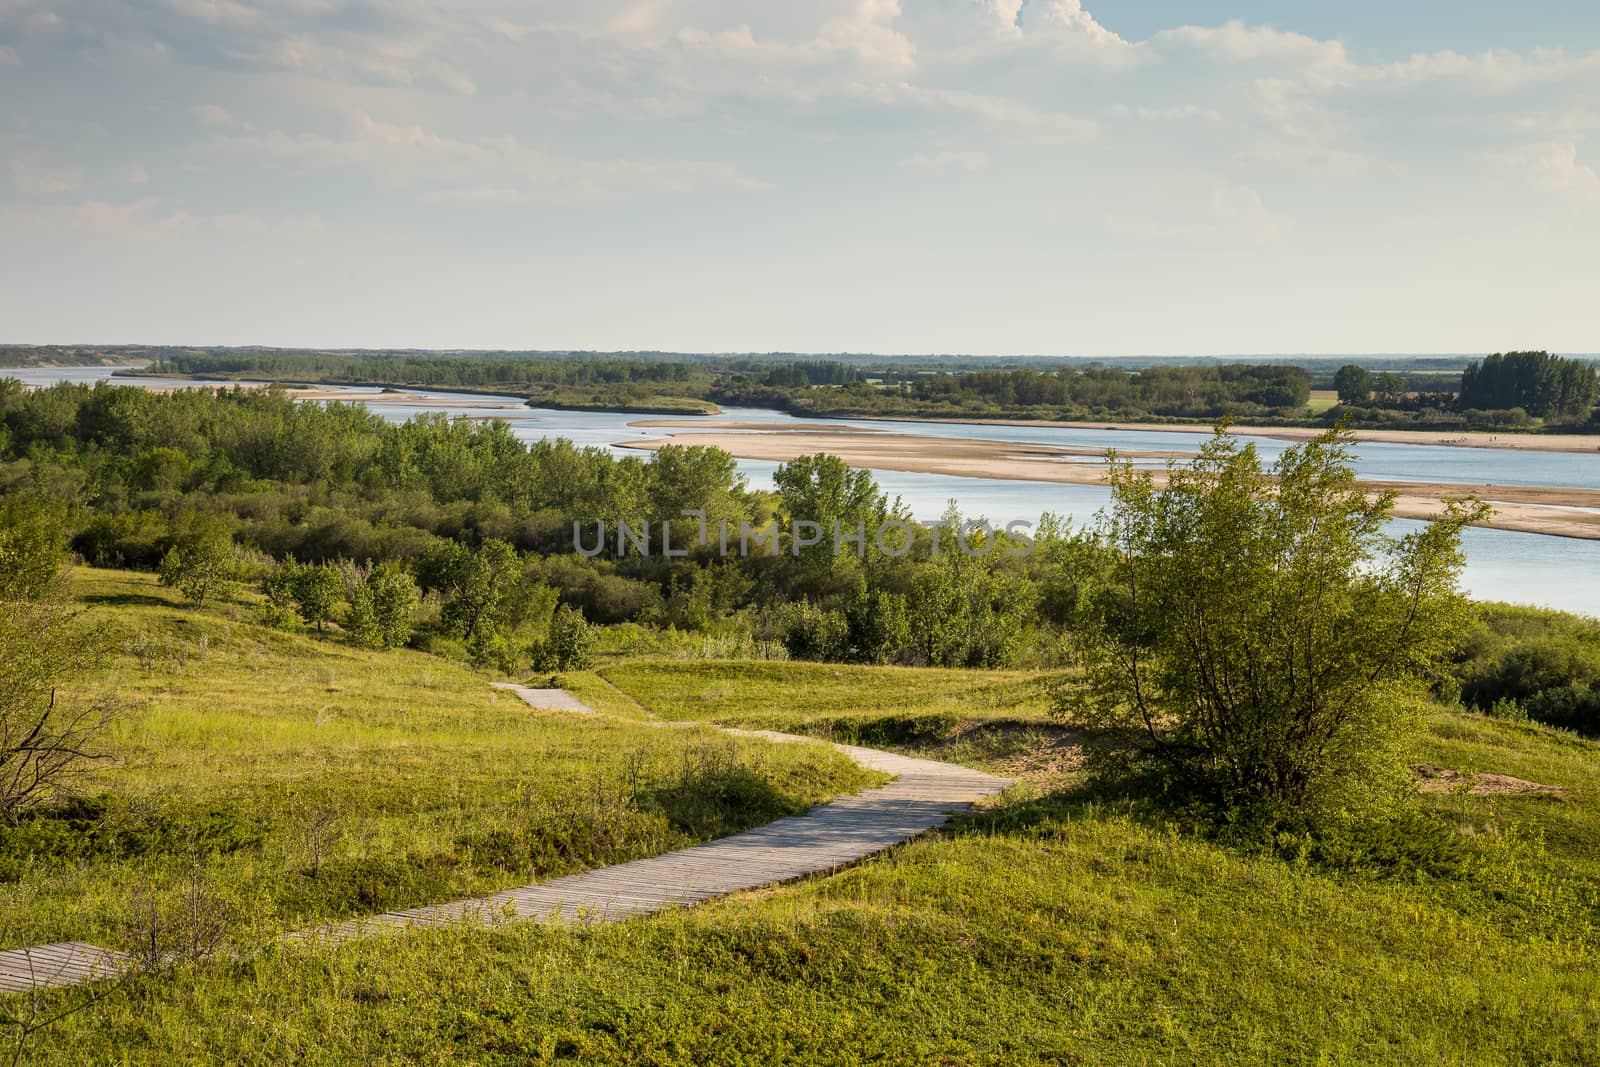 The boardwalk down to the river at Cranberry Flats Conservation Area Saskatoon.